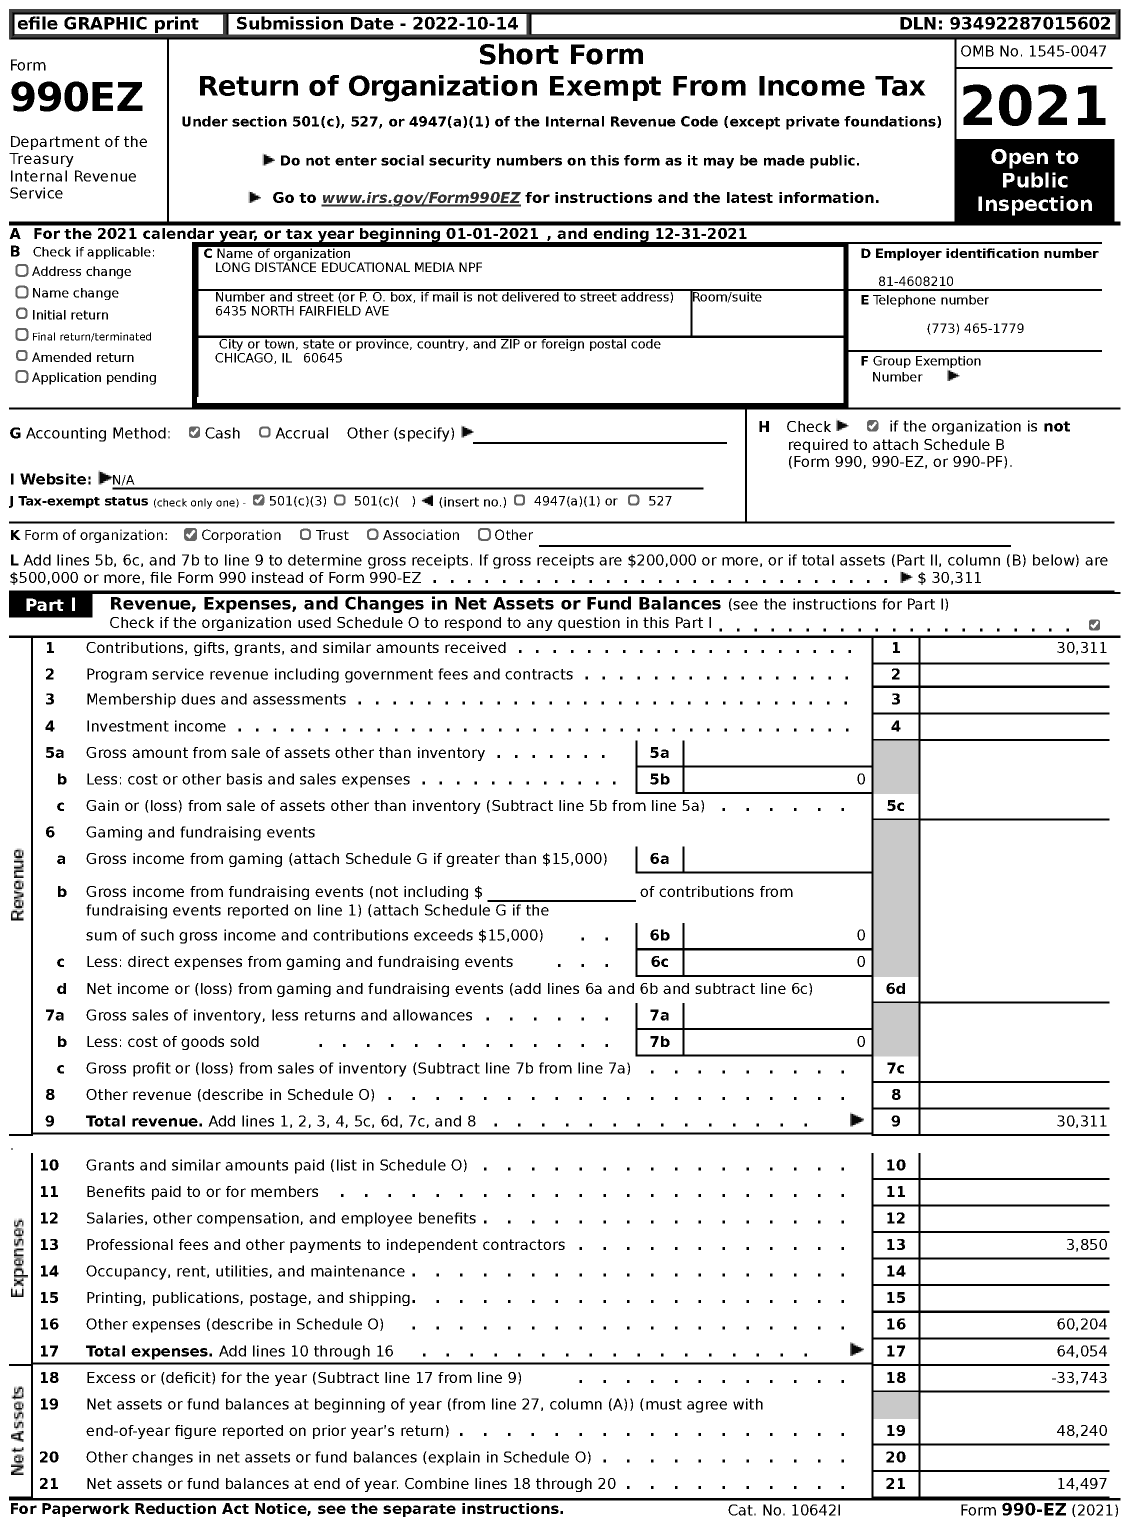 Image of first page of 2021 Form 990EZ for Long Distance Educational Media NPF